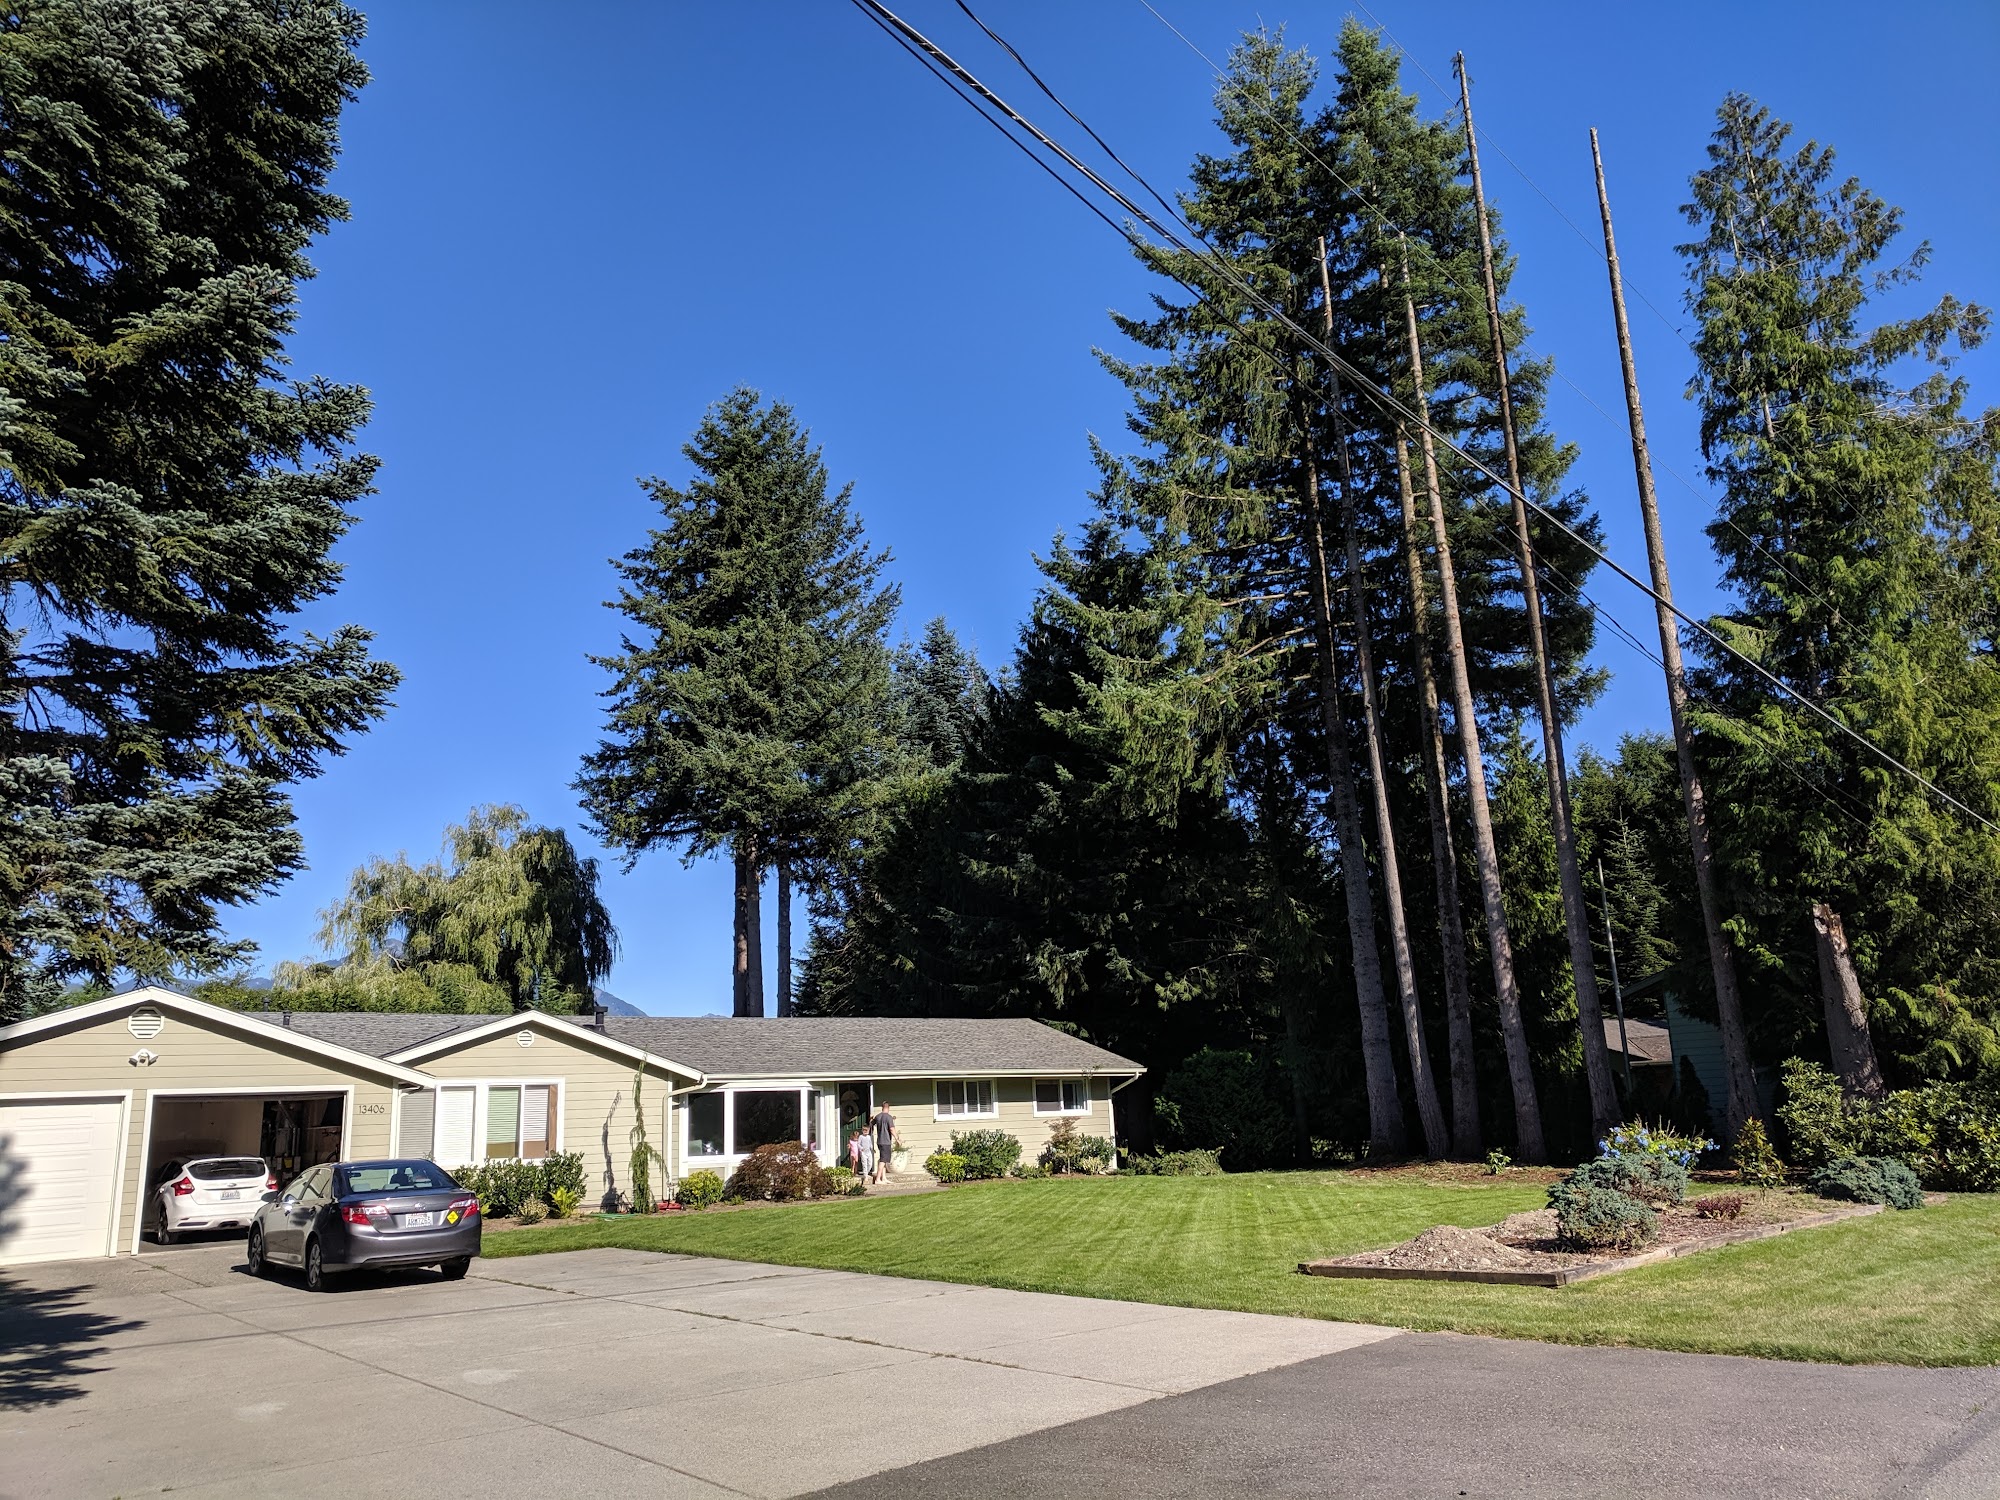 Clear View Tree Service 13533 421st Ave SE, North Bend Washington 98045